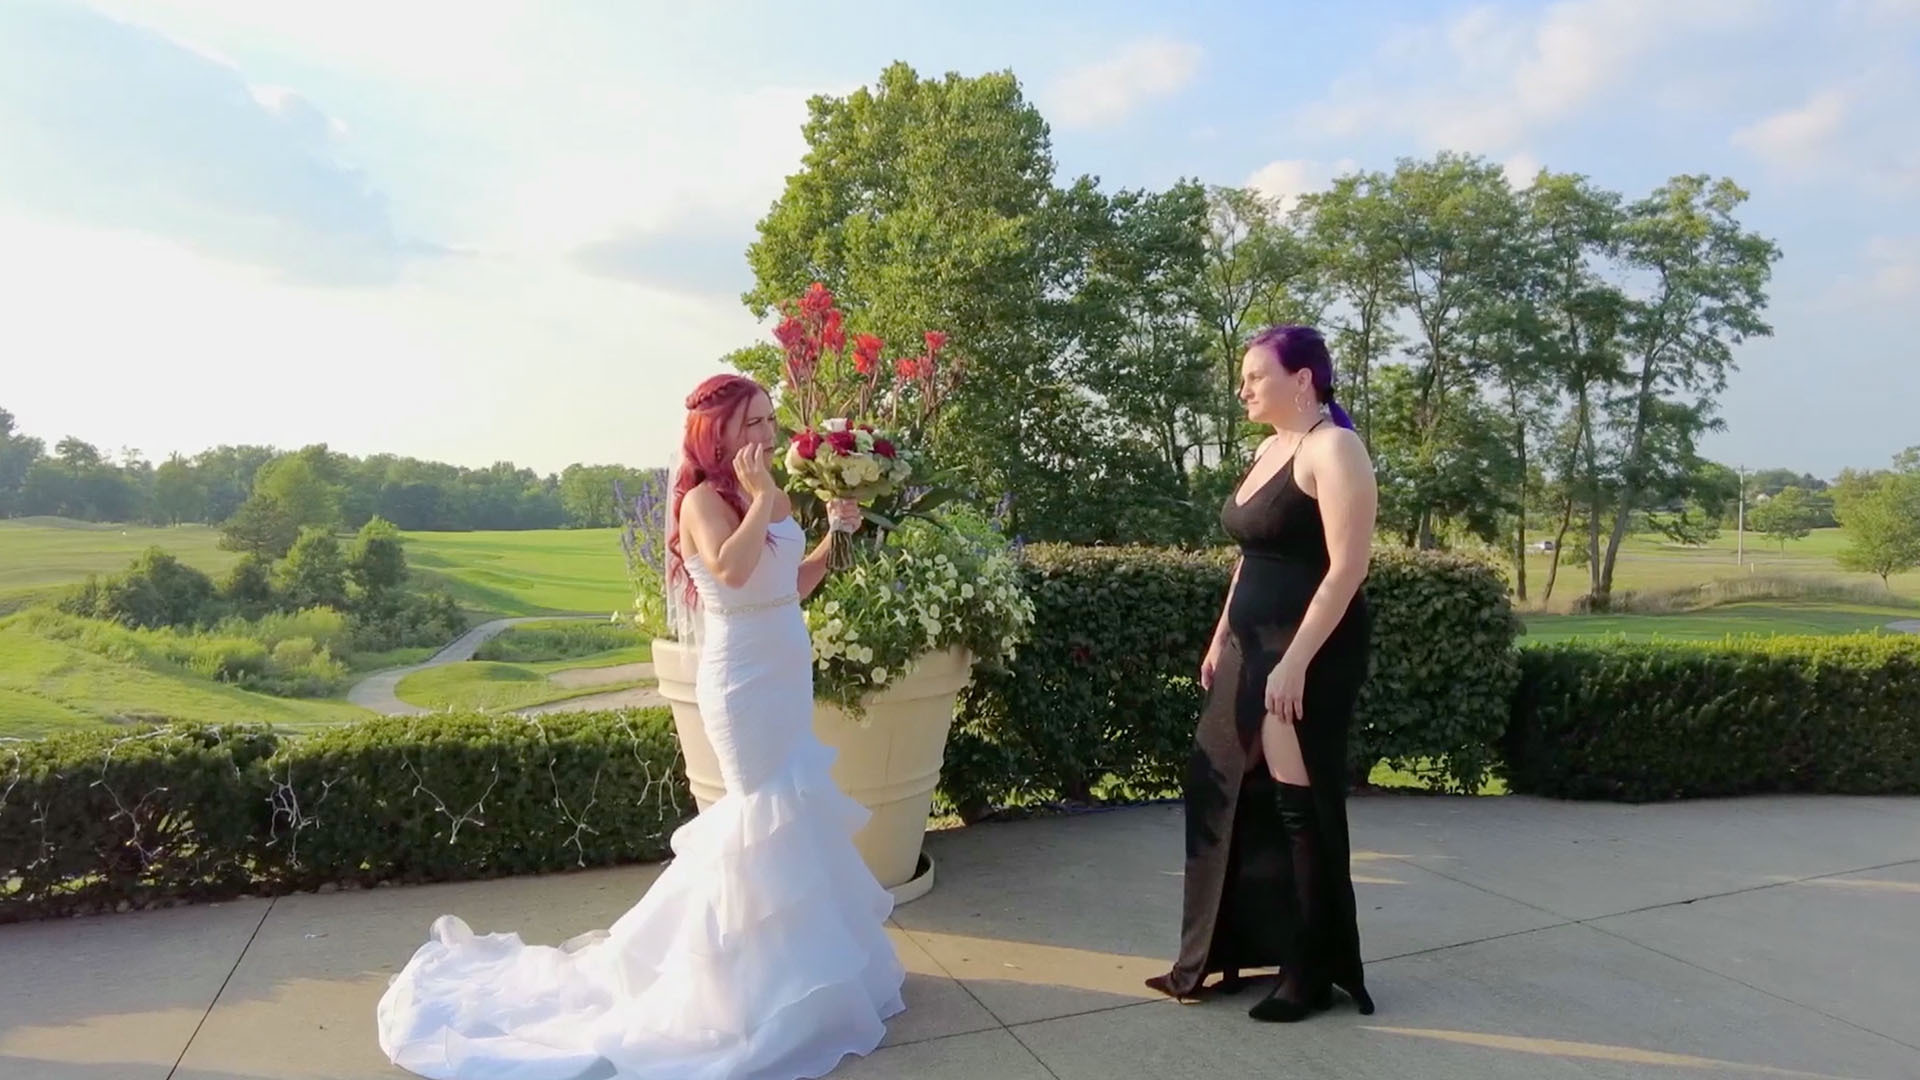 Watch Kelly Surprises Sara at Her Wedding | Life After Lockup Video Extras